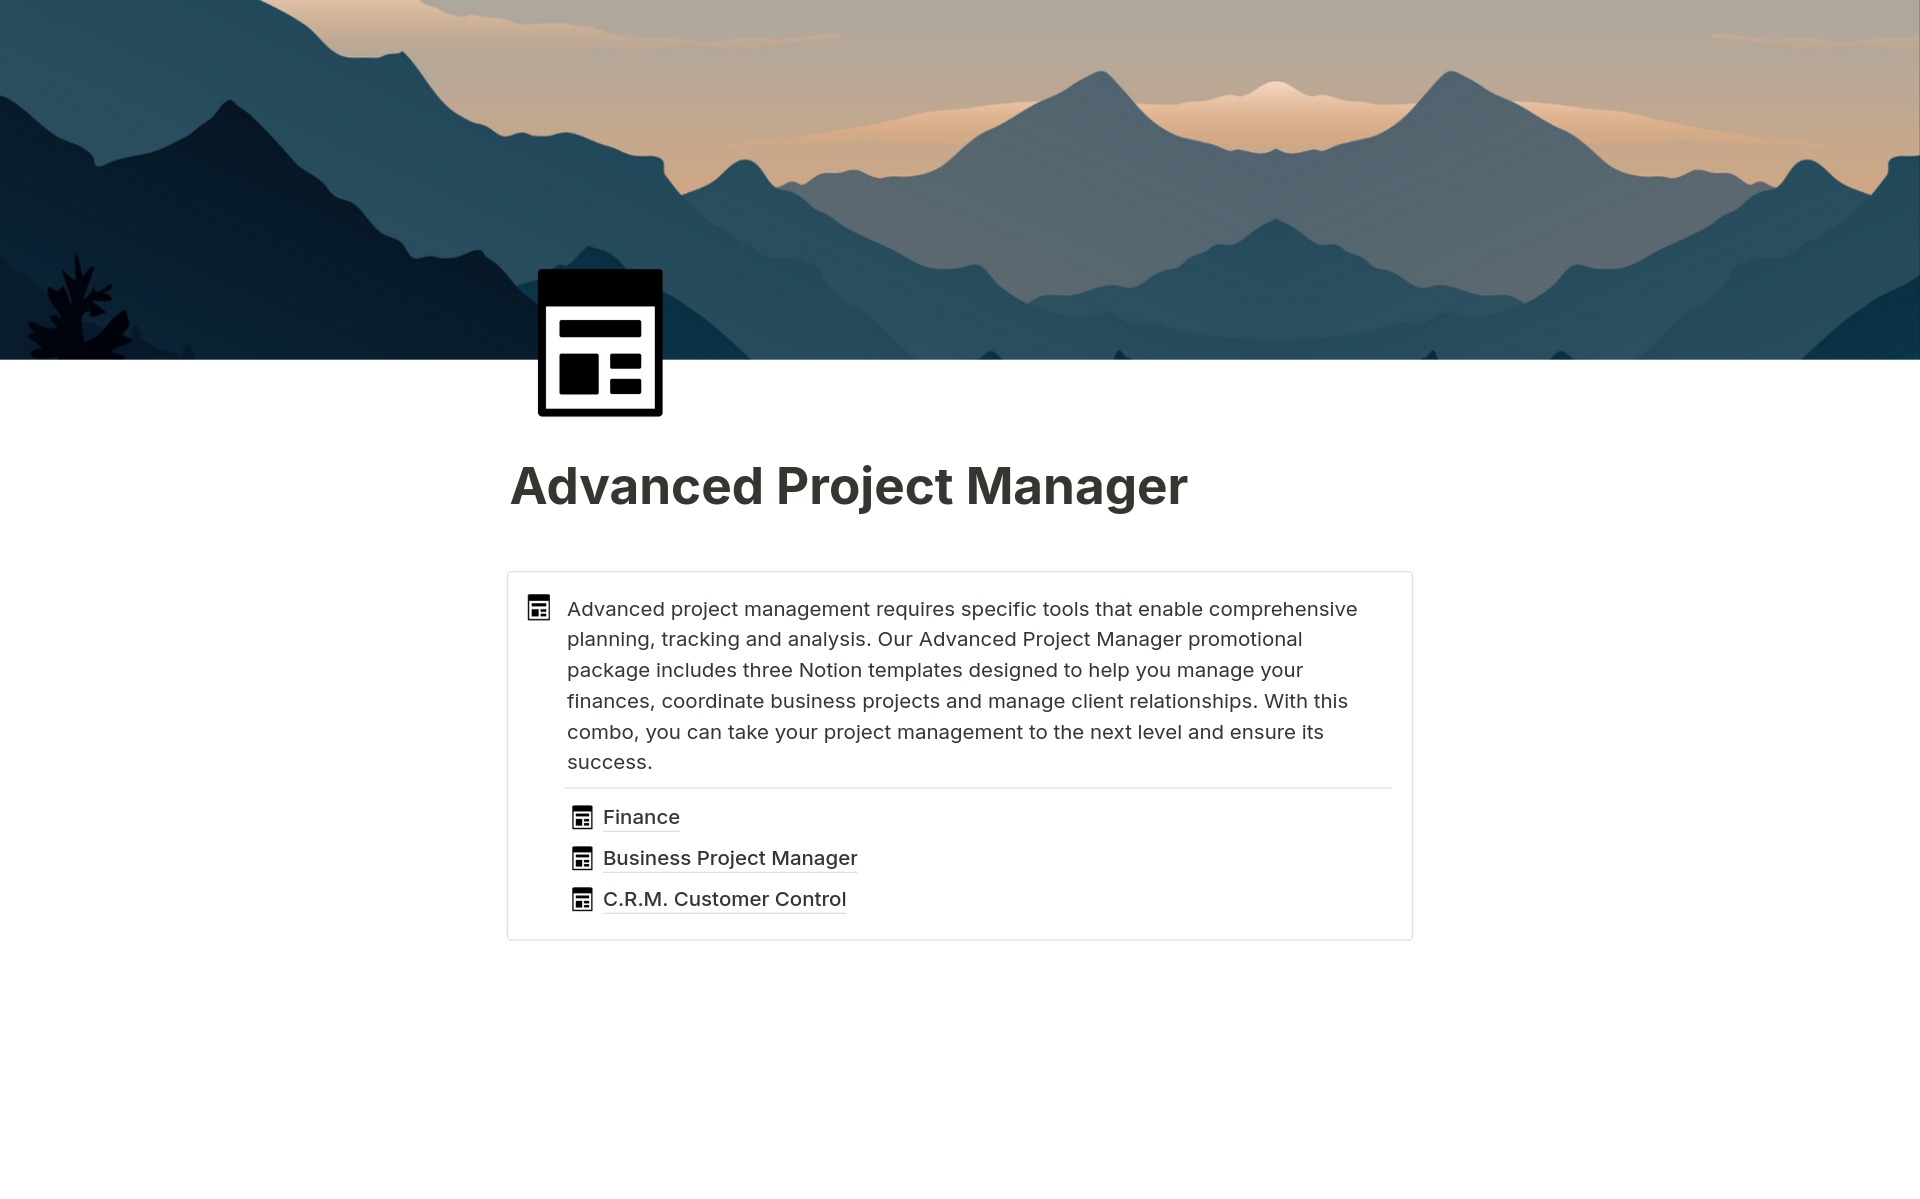  Advanced Project Manager

Advanced project management requires specific tools to enable comprehensive planning, tracking and analysis.